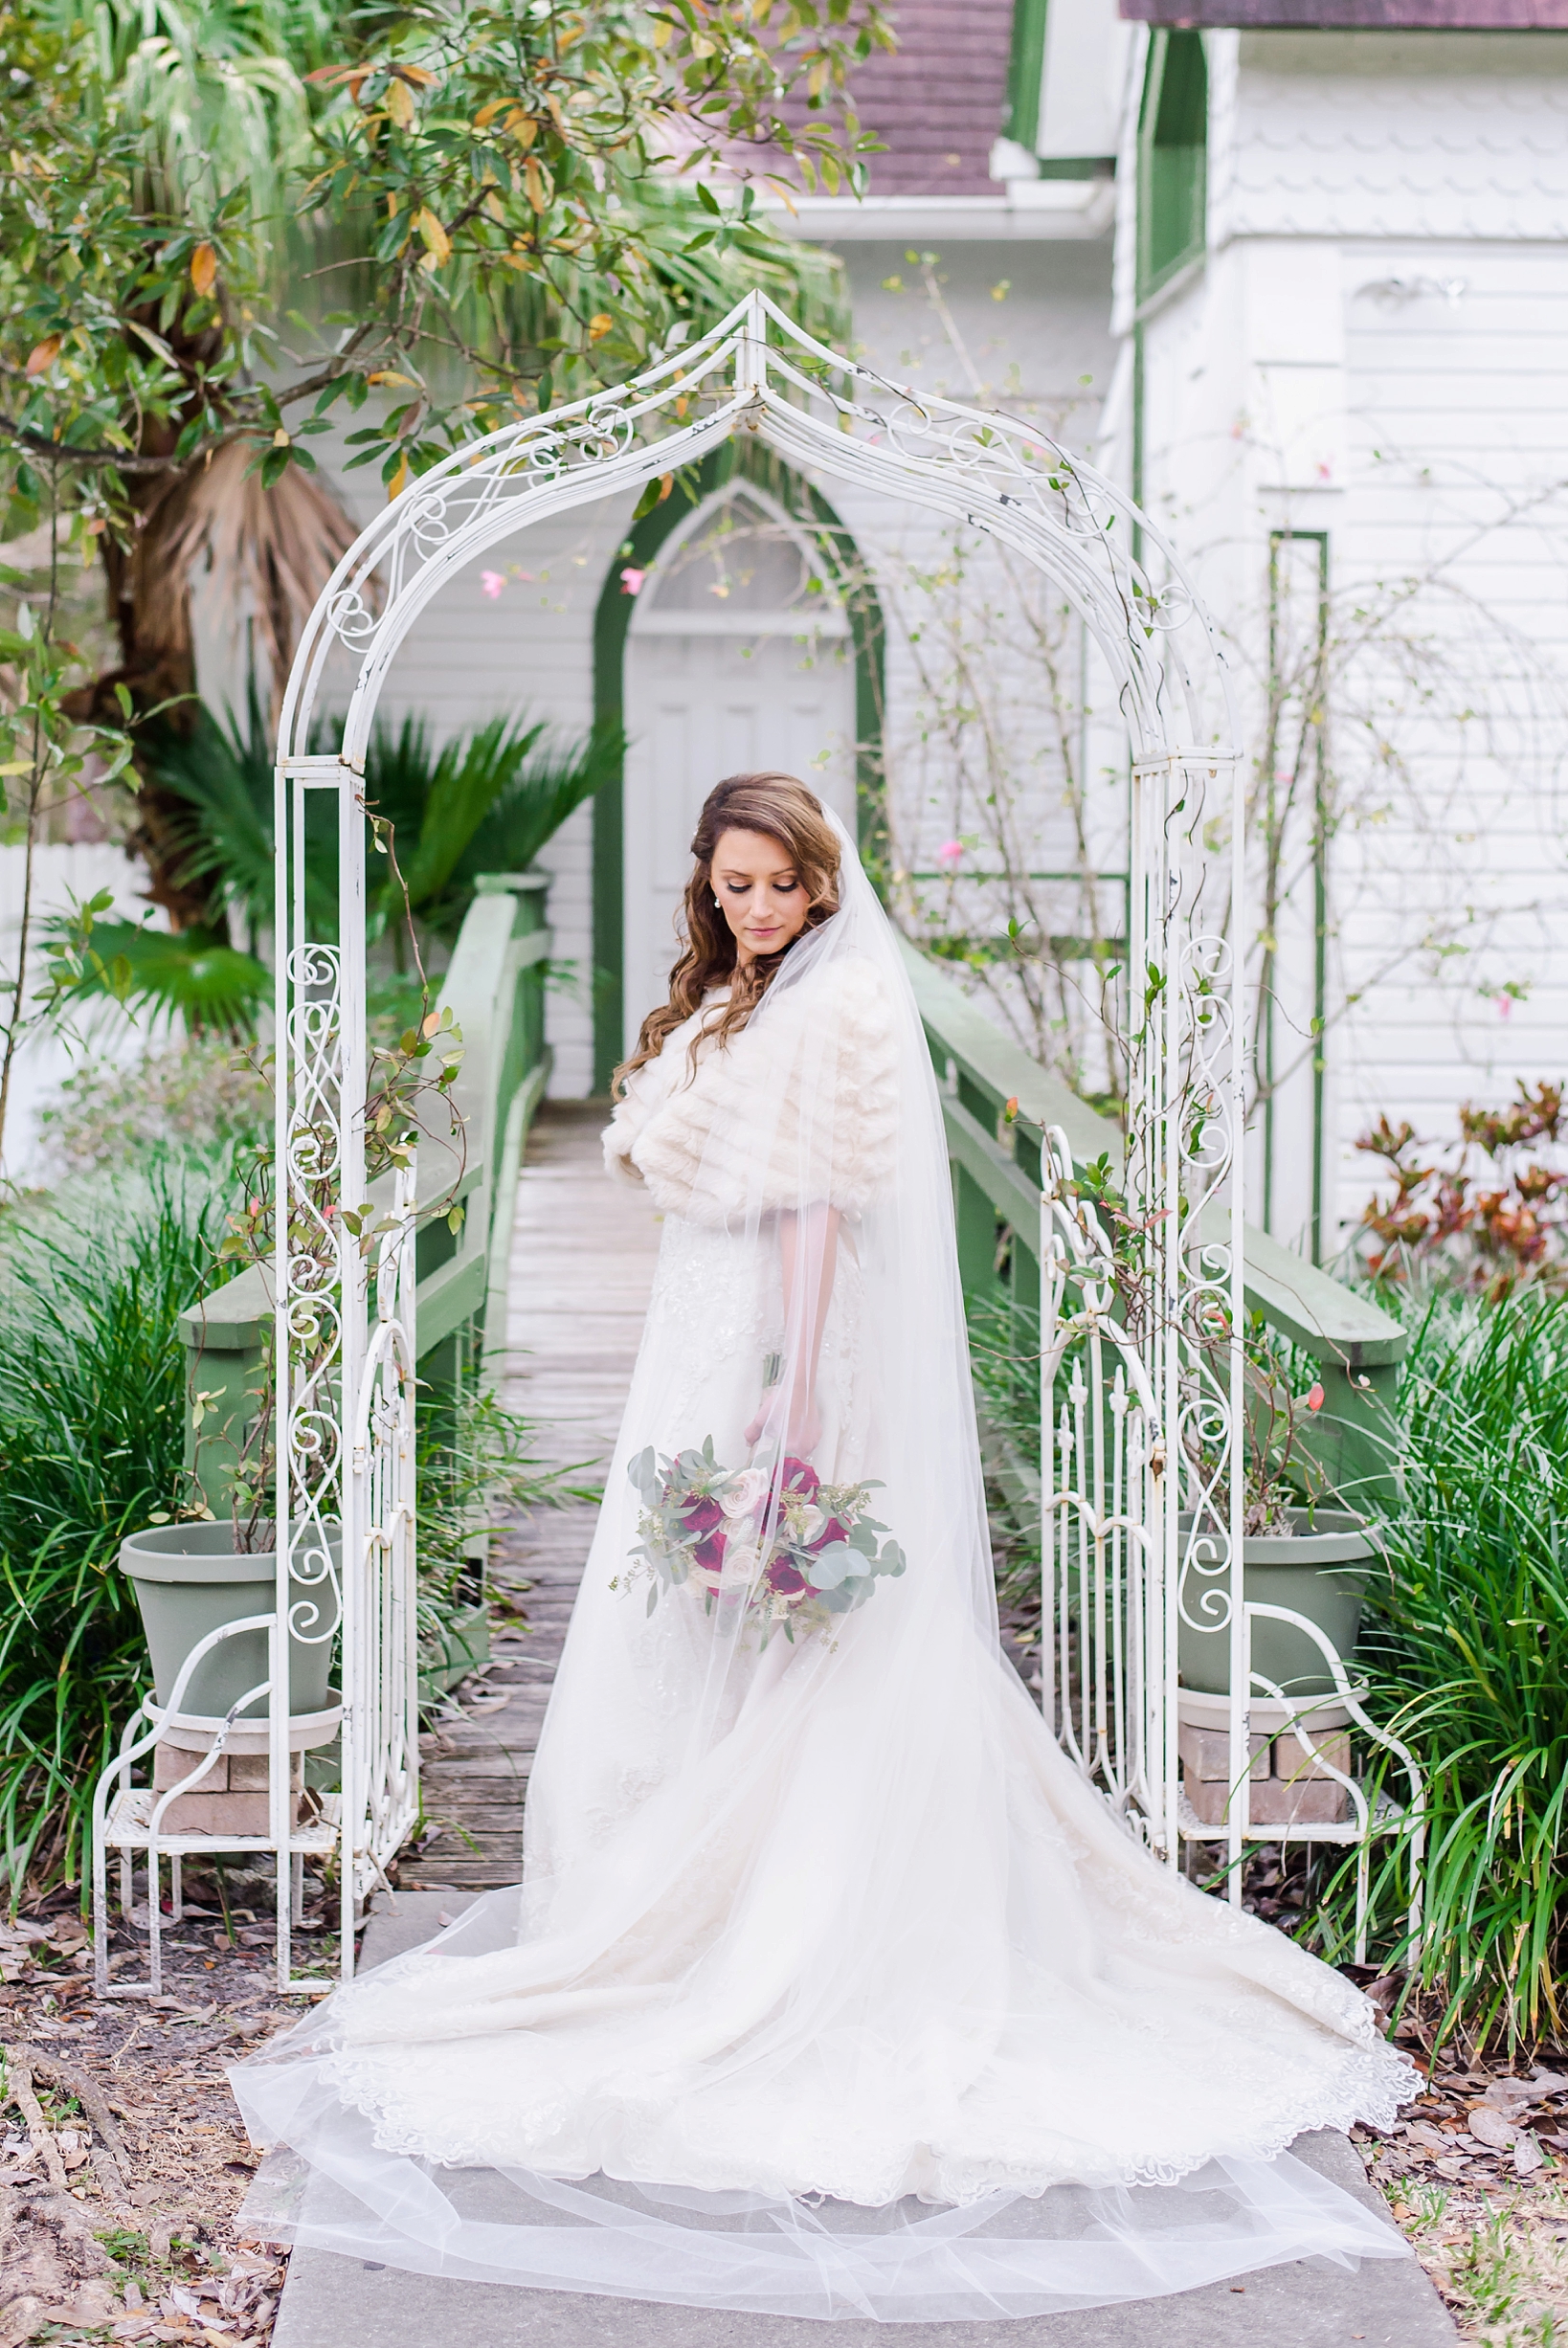 The bride wearing her faux fur wrap on a cold wedding day in front of the Andrews Memorial Chapel in Dunedin, FL